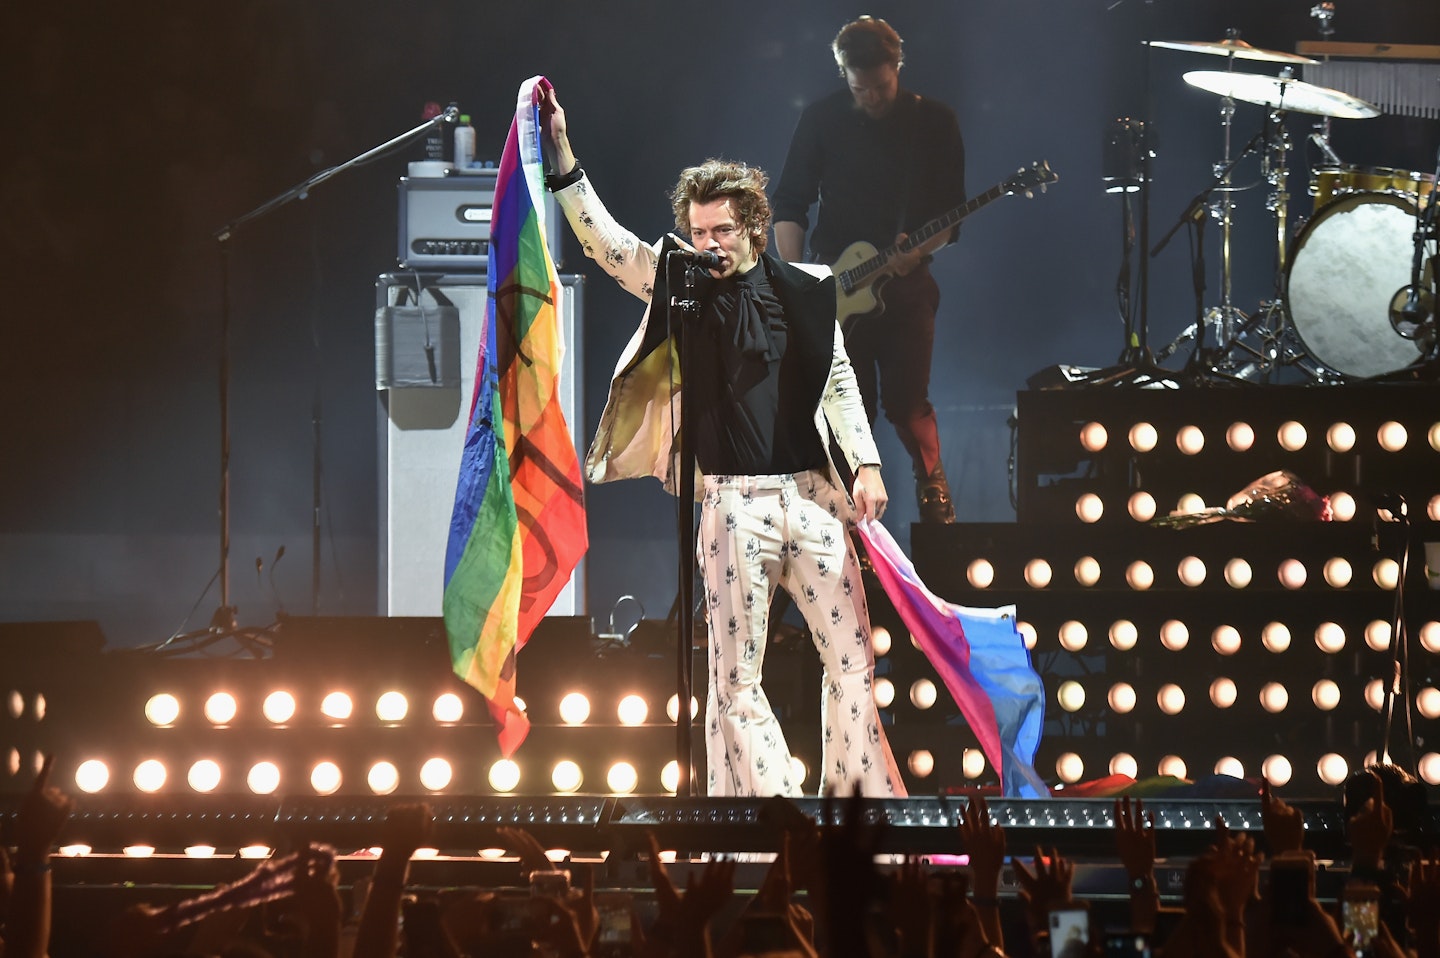 Harry Styles holds rainbow flags as he performs onstage during Harry Styles: Live On Tour - New York at Madison Square Garden on June 21, 2018 in New York City.